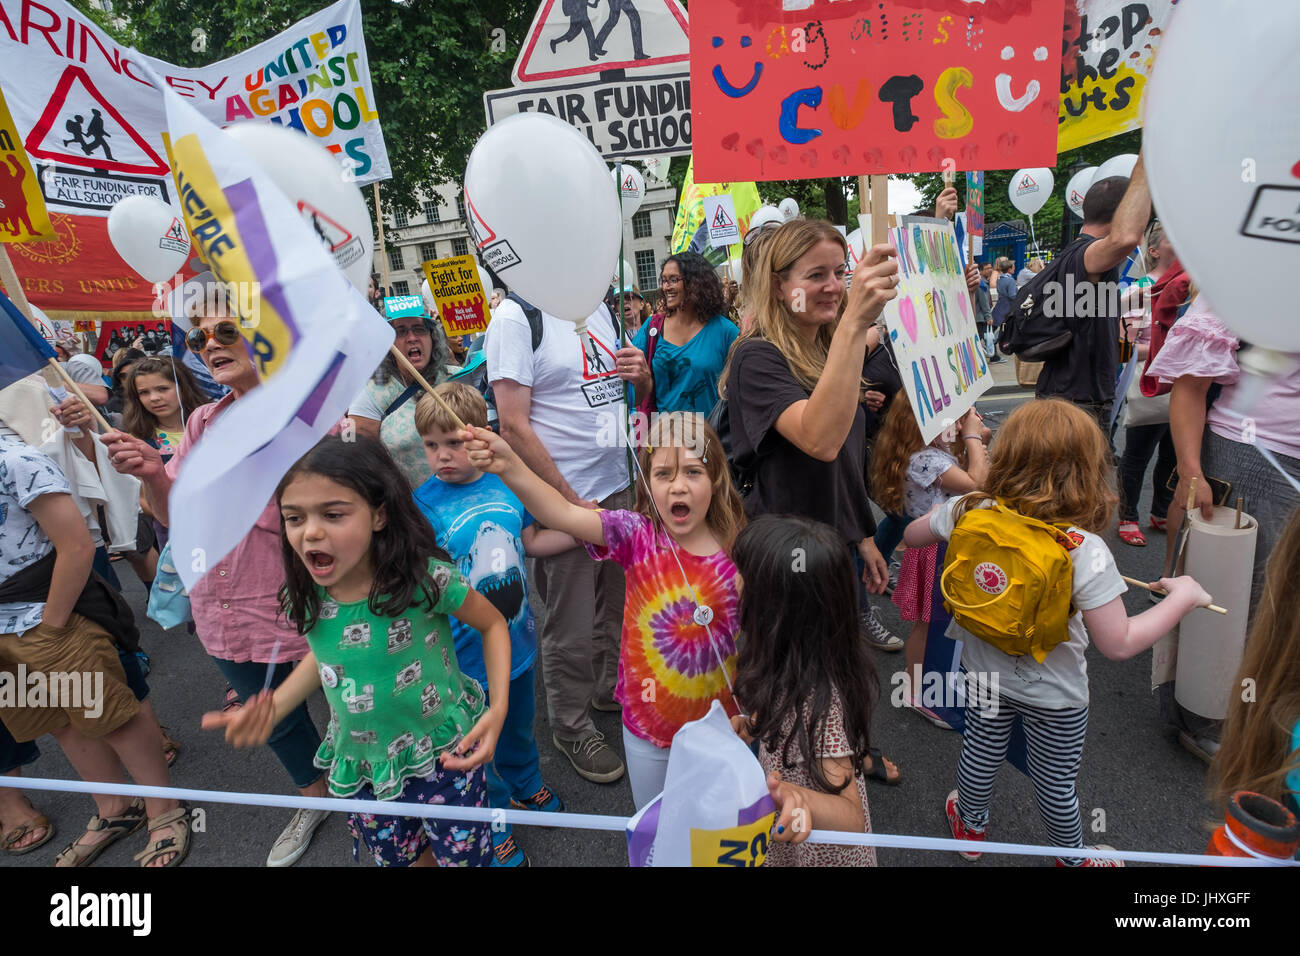 London, UK. 16th July 2017. Many of the hundreds of parents, children, teachers and others marching from Embankment to Parliament Square in a protest against unfair cuts in school funding shout loudly as they pass Downing St. The 'Carnival Against Cuts' was organised by parents in the 'Fair Funding for All Schools' campaign and supported by the NUT.  arly in the inner cities. Ca Credit: Peter Marshall/Alamy Live News Stock Photo